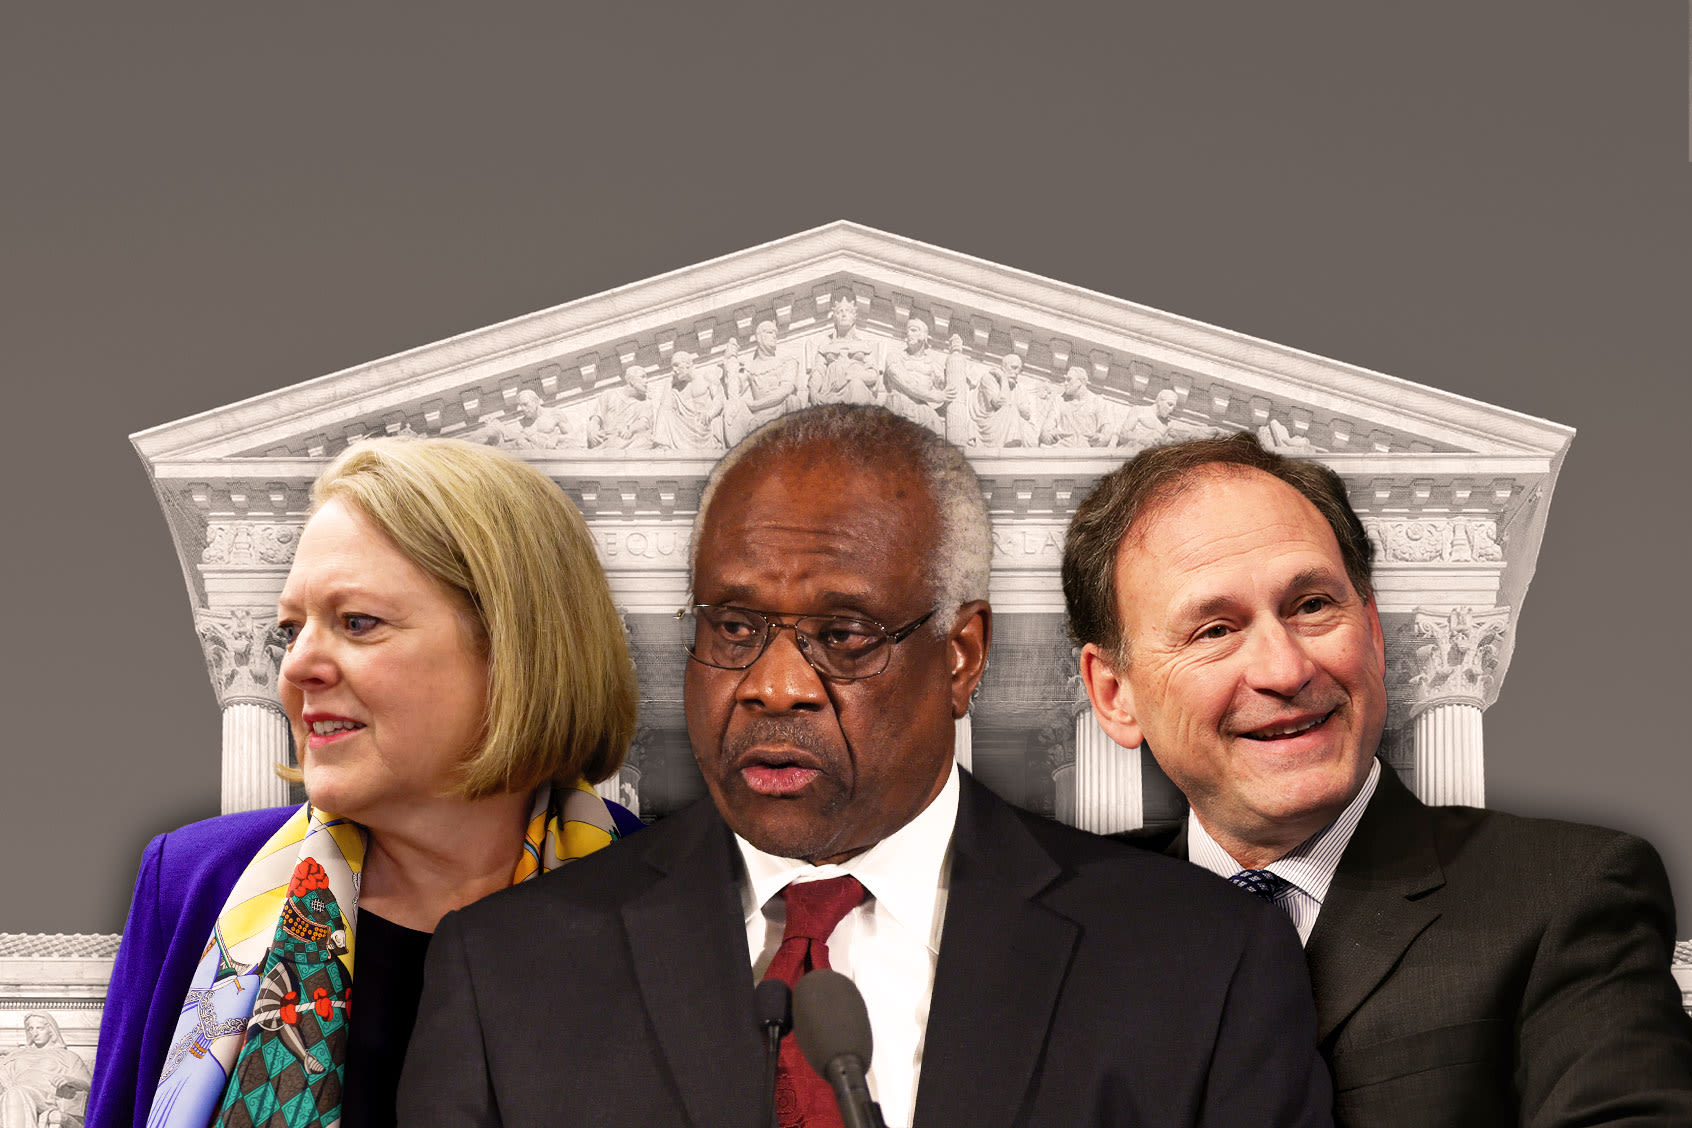 A Supreme Court held to the lowest standards